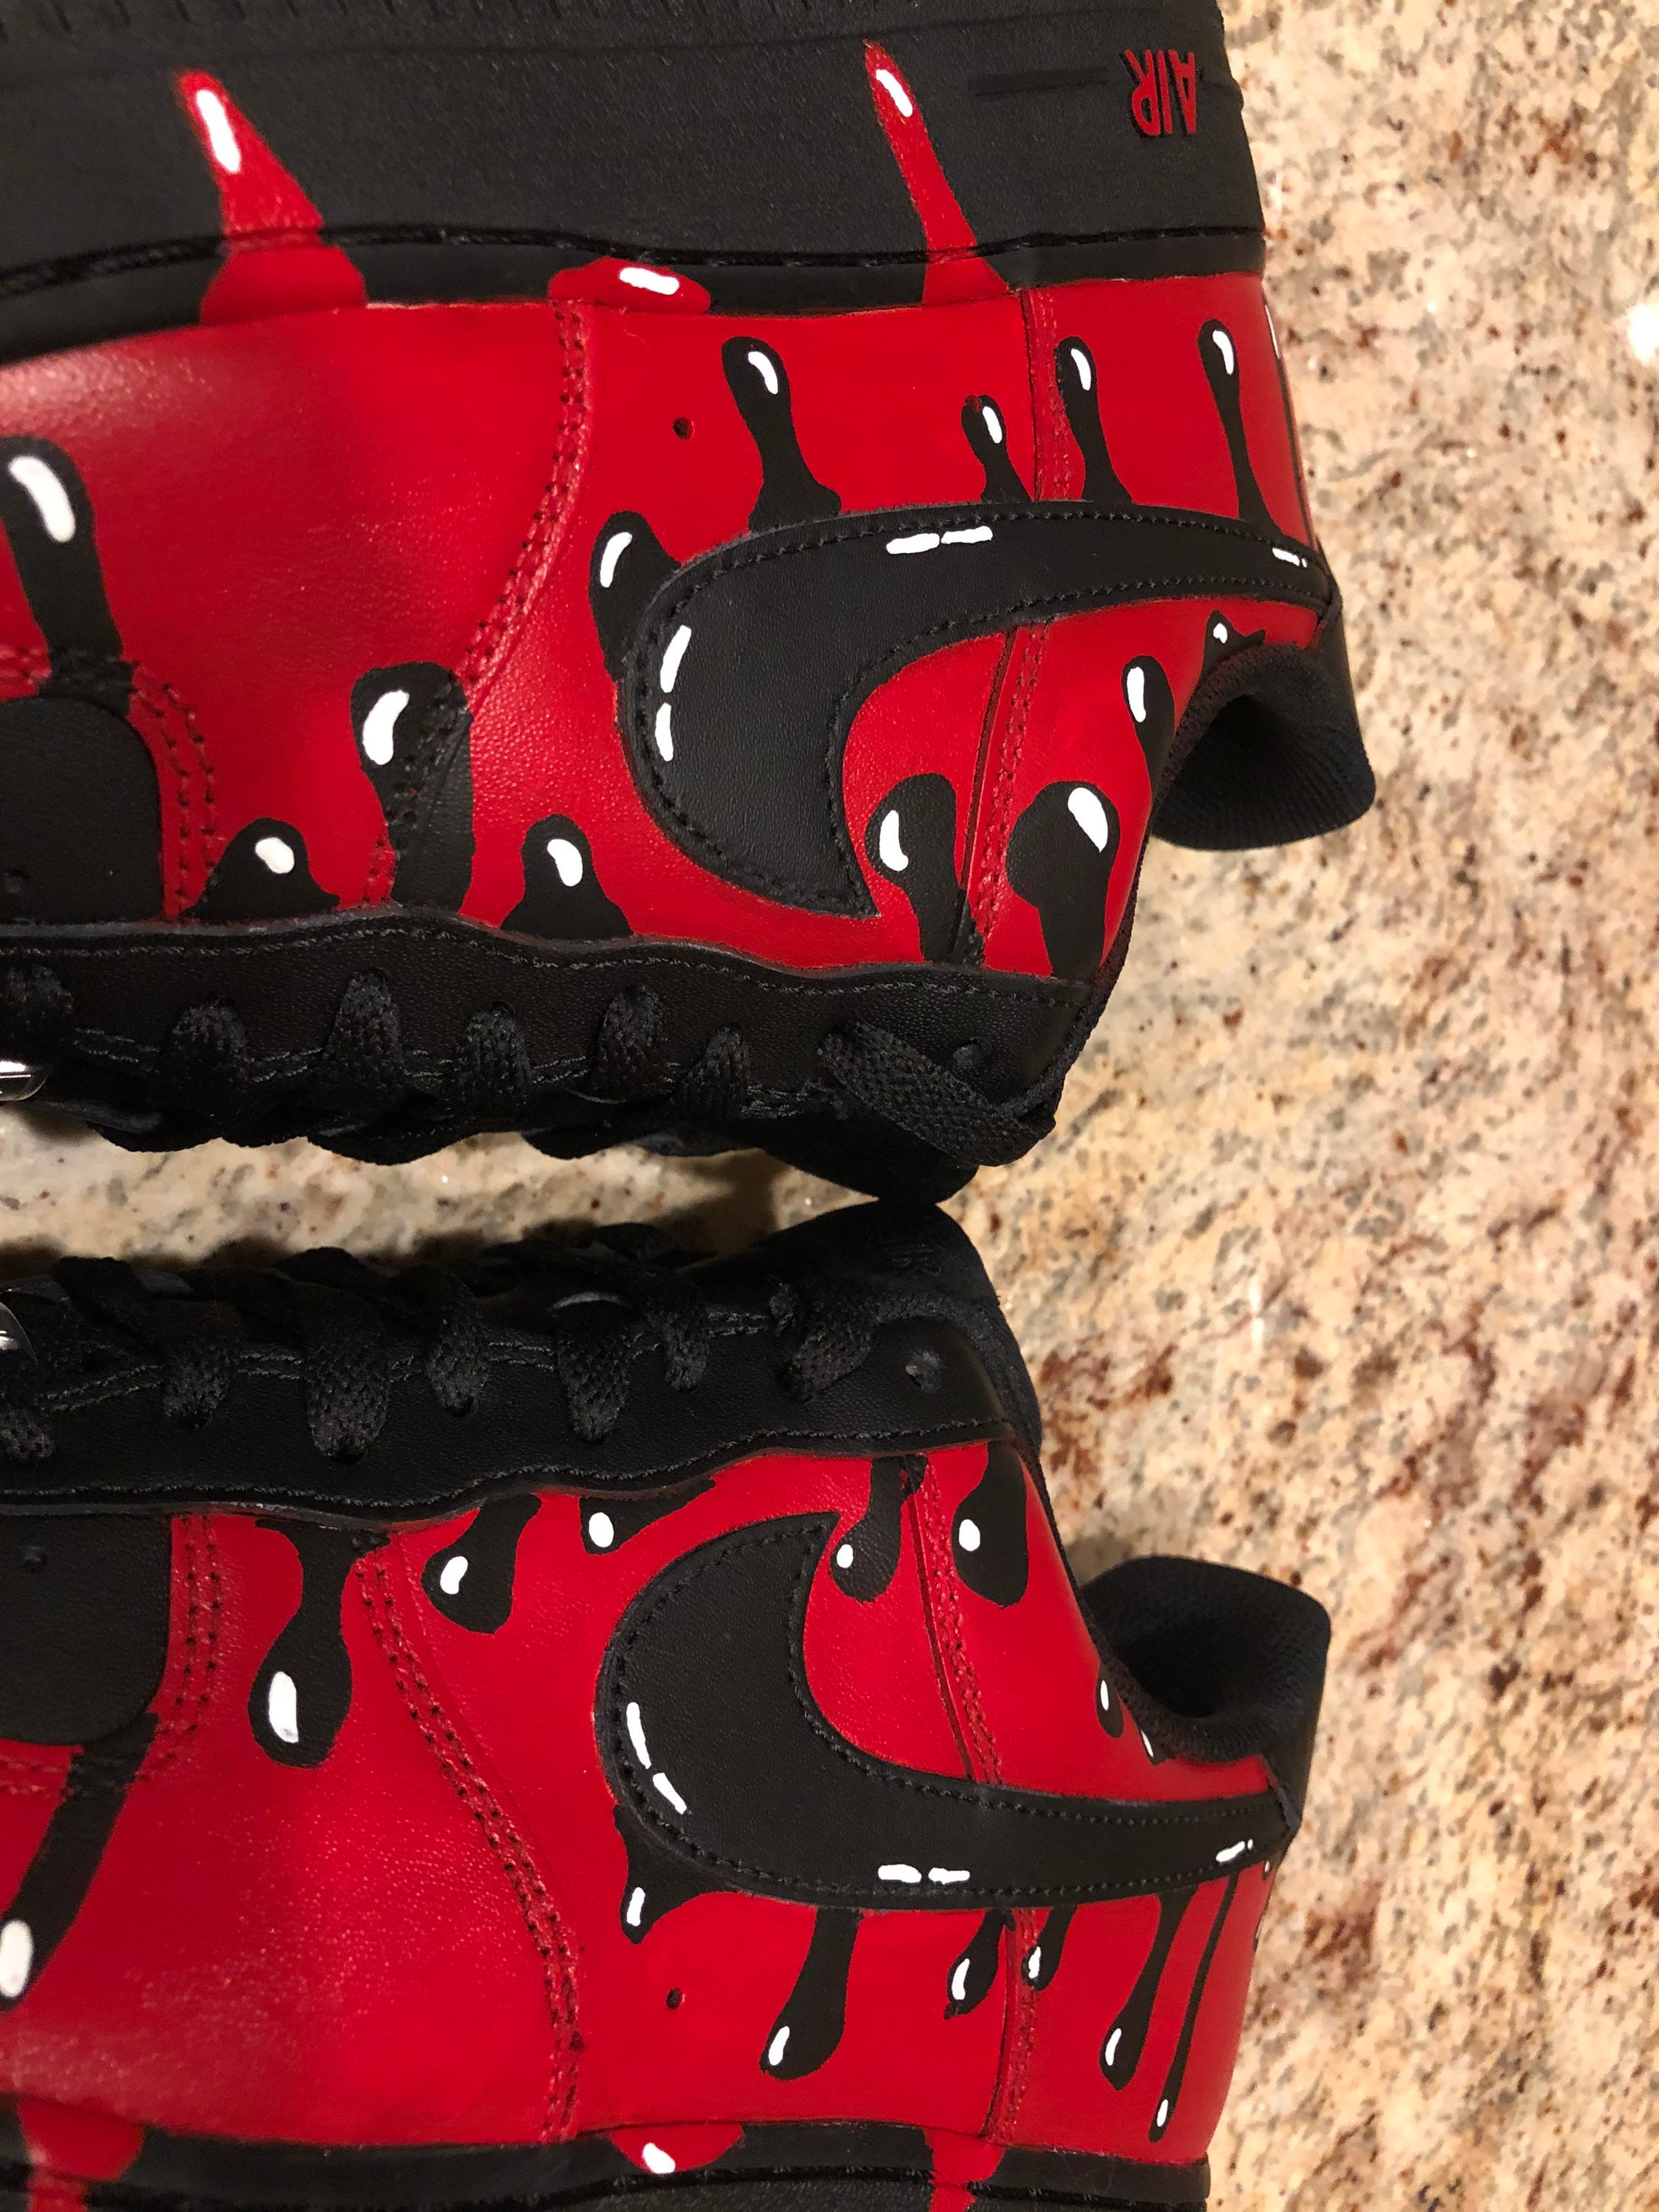 Custom “Sexyy Red” LV AF1 : r/Customsneakers